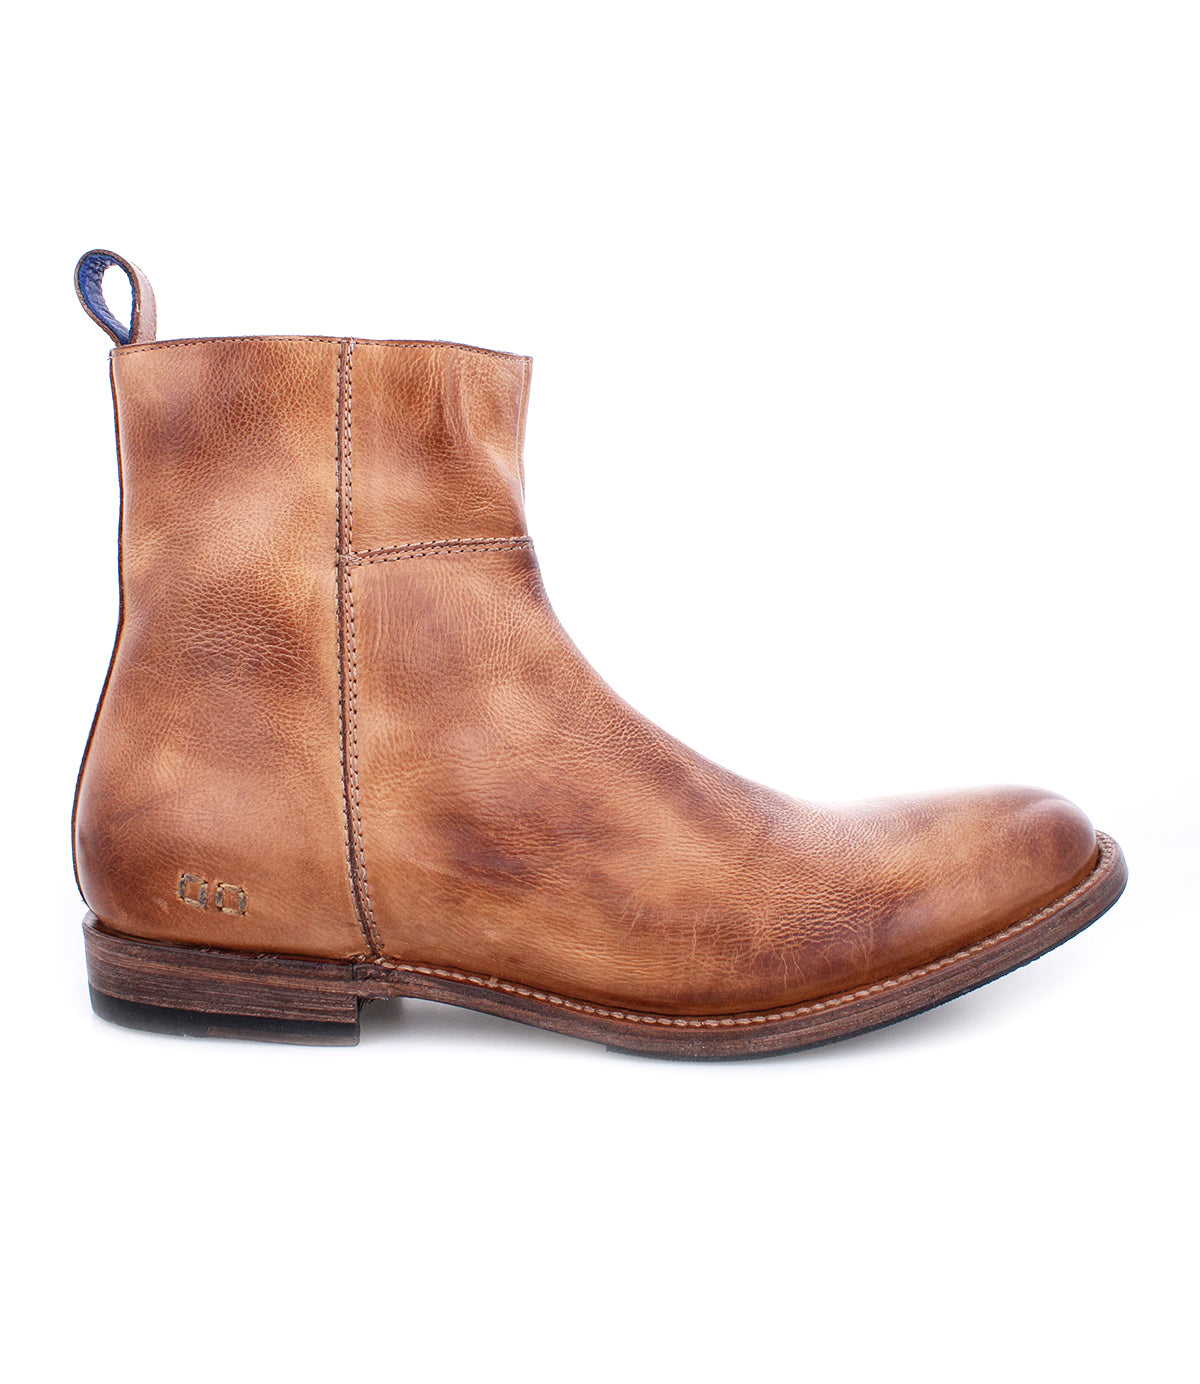 A classic silhouette Kaldi men's handmade tan leather ankle boot by Bed Stu on a white background.